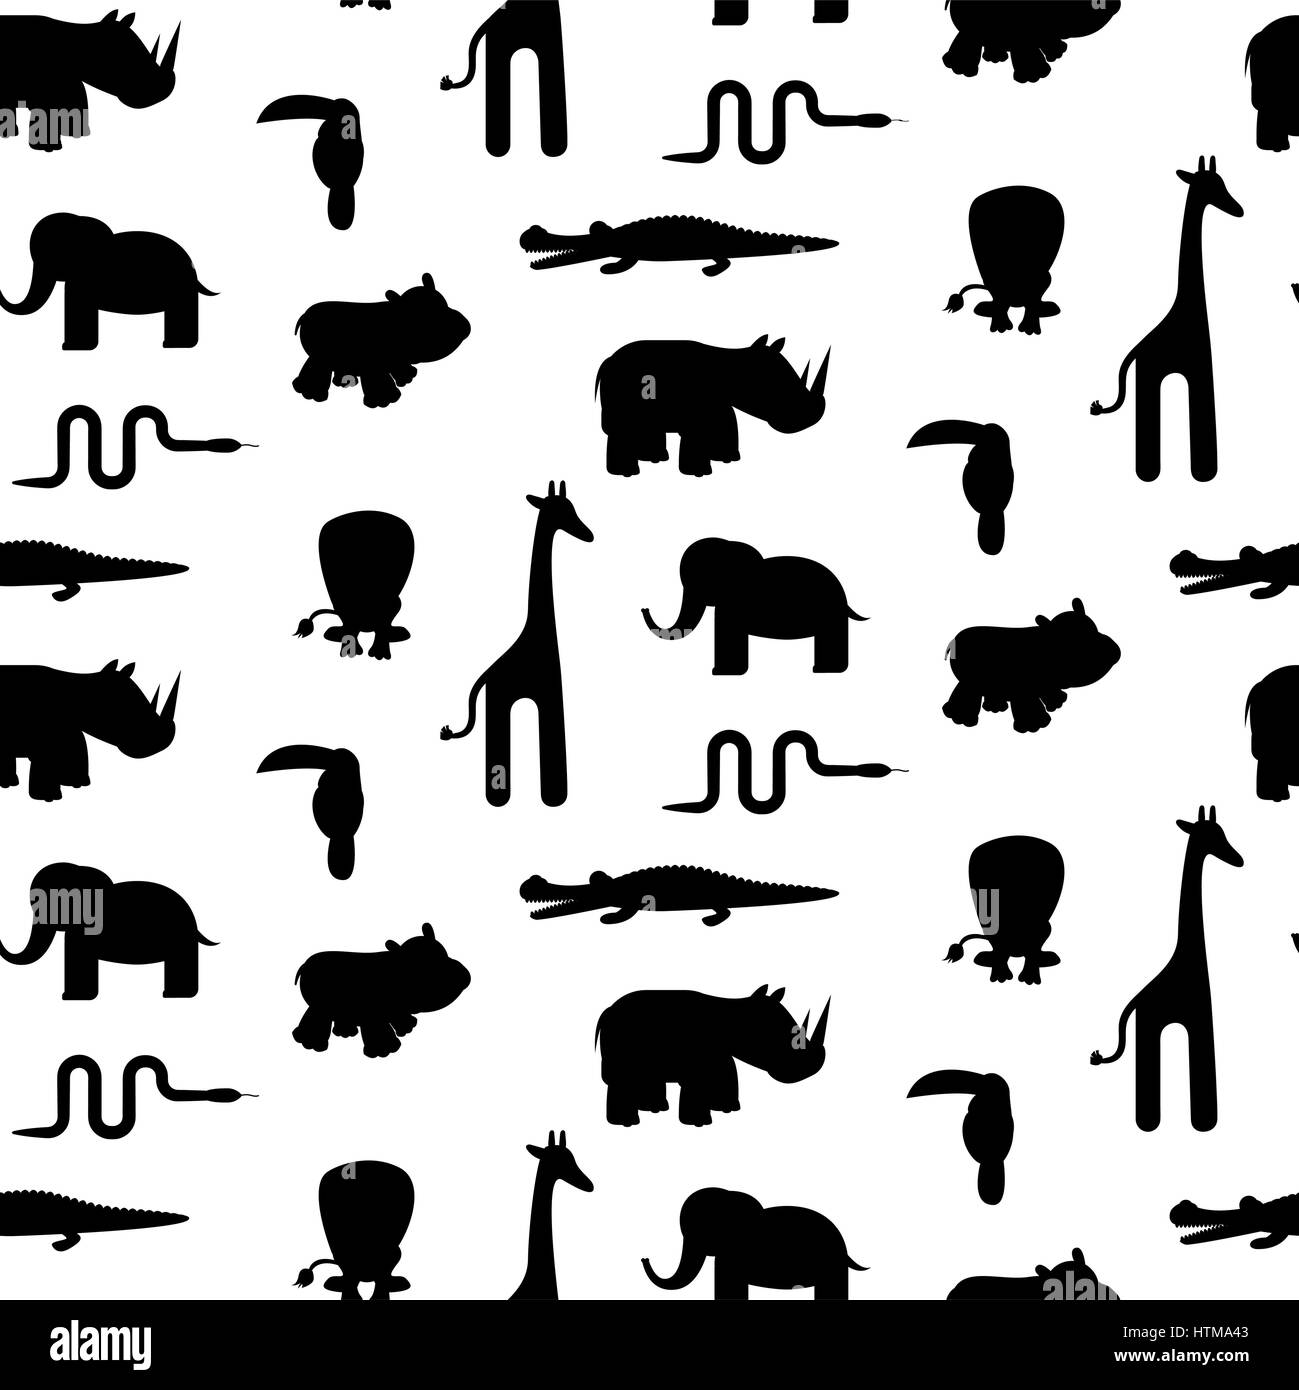 Zoo animal silhouettes seamless pattern vector. Stock Vector